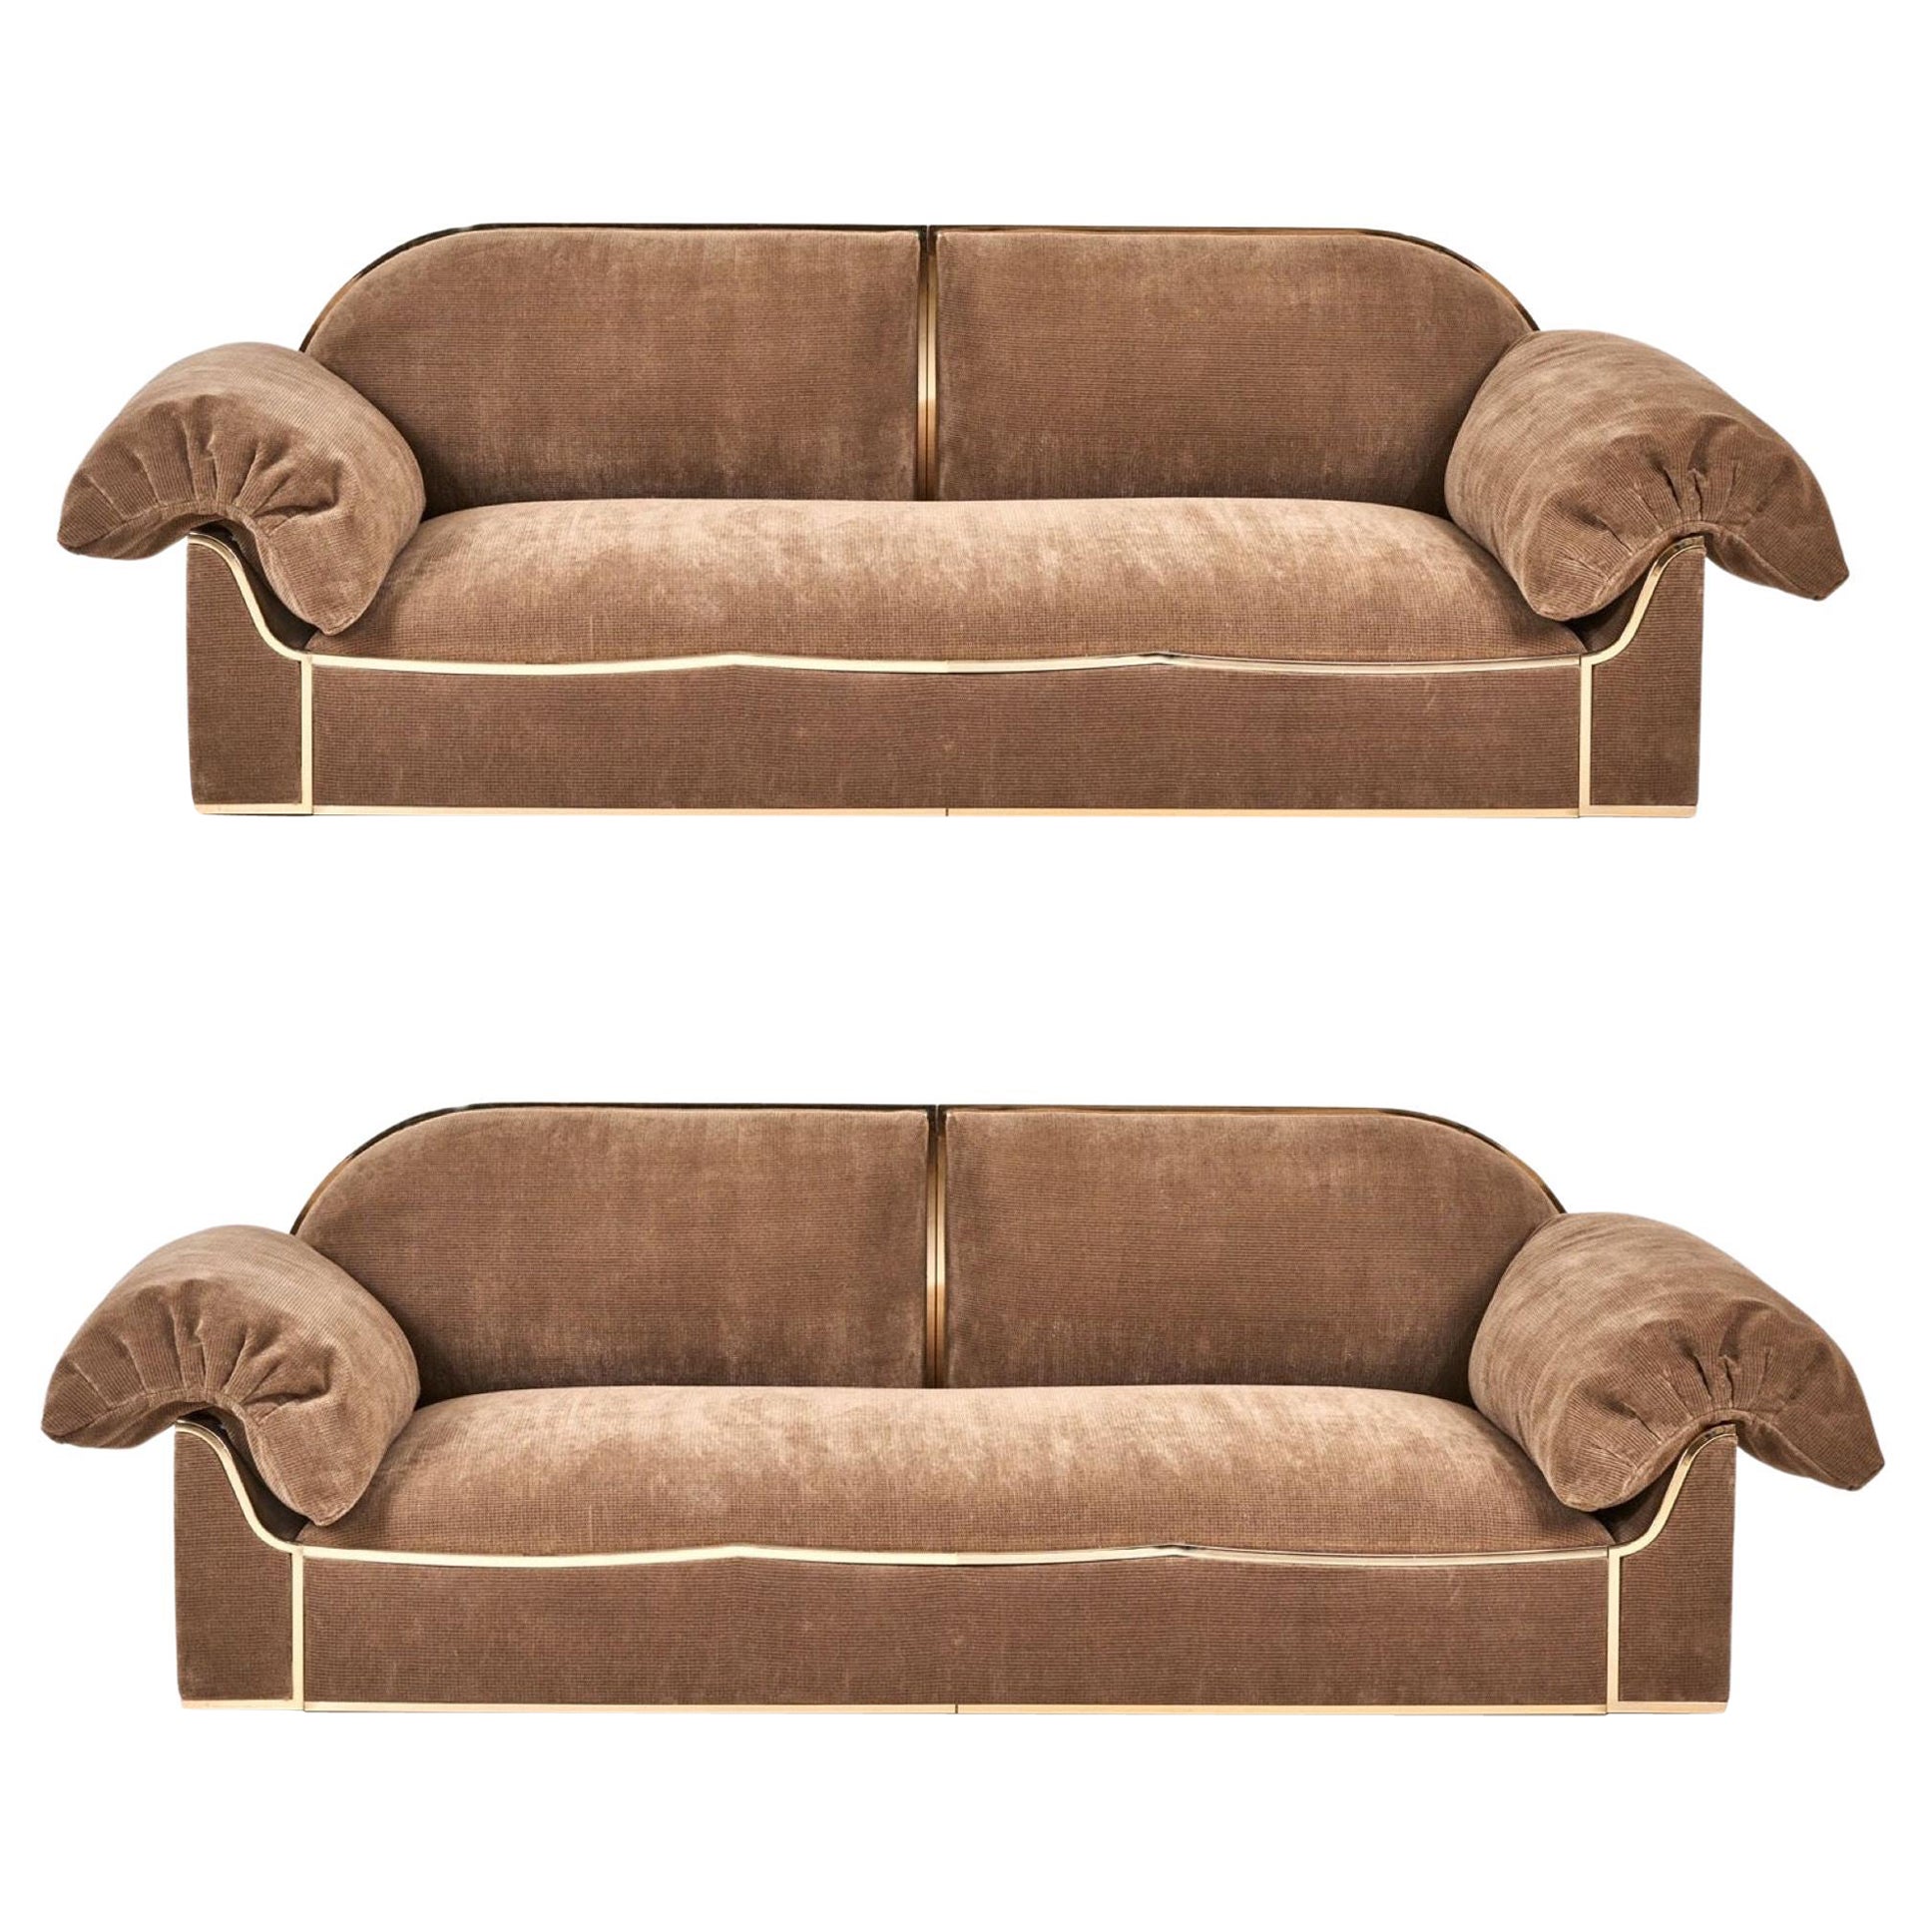 Pair of Brass Frame Sofa's, 1960 For Sale